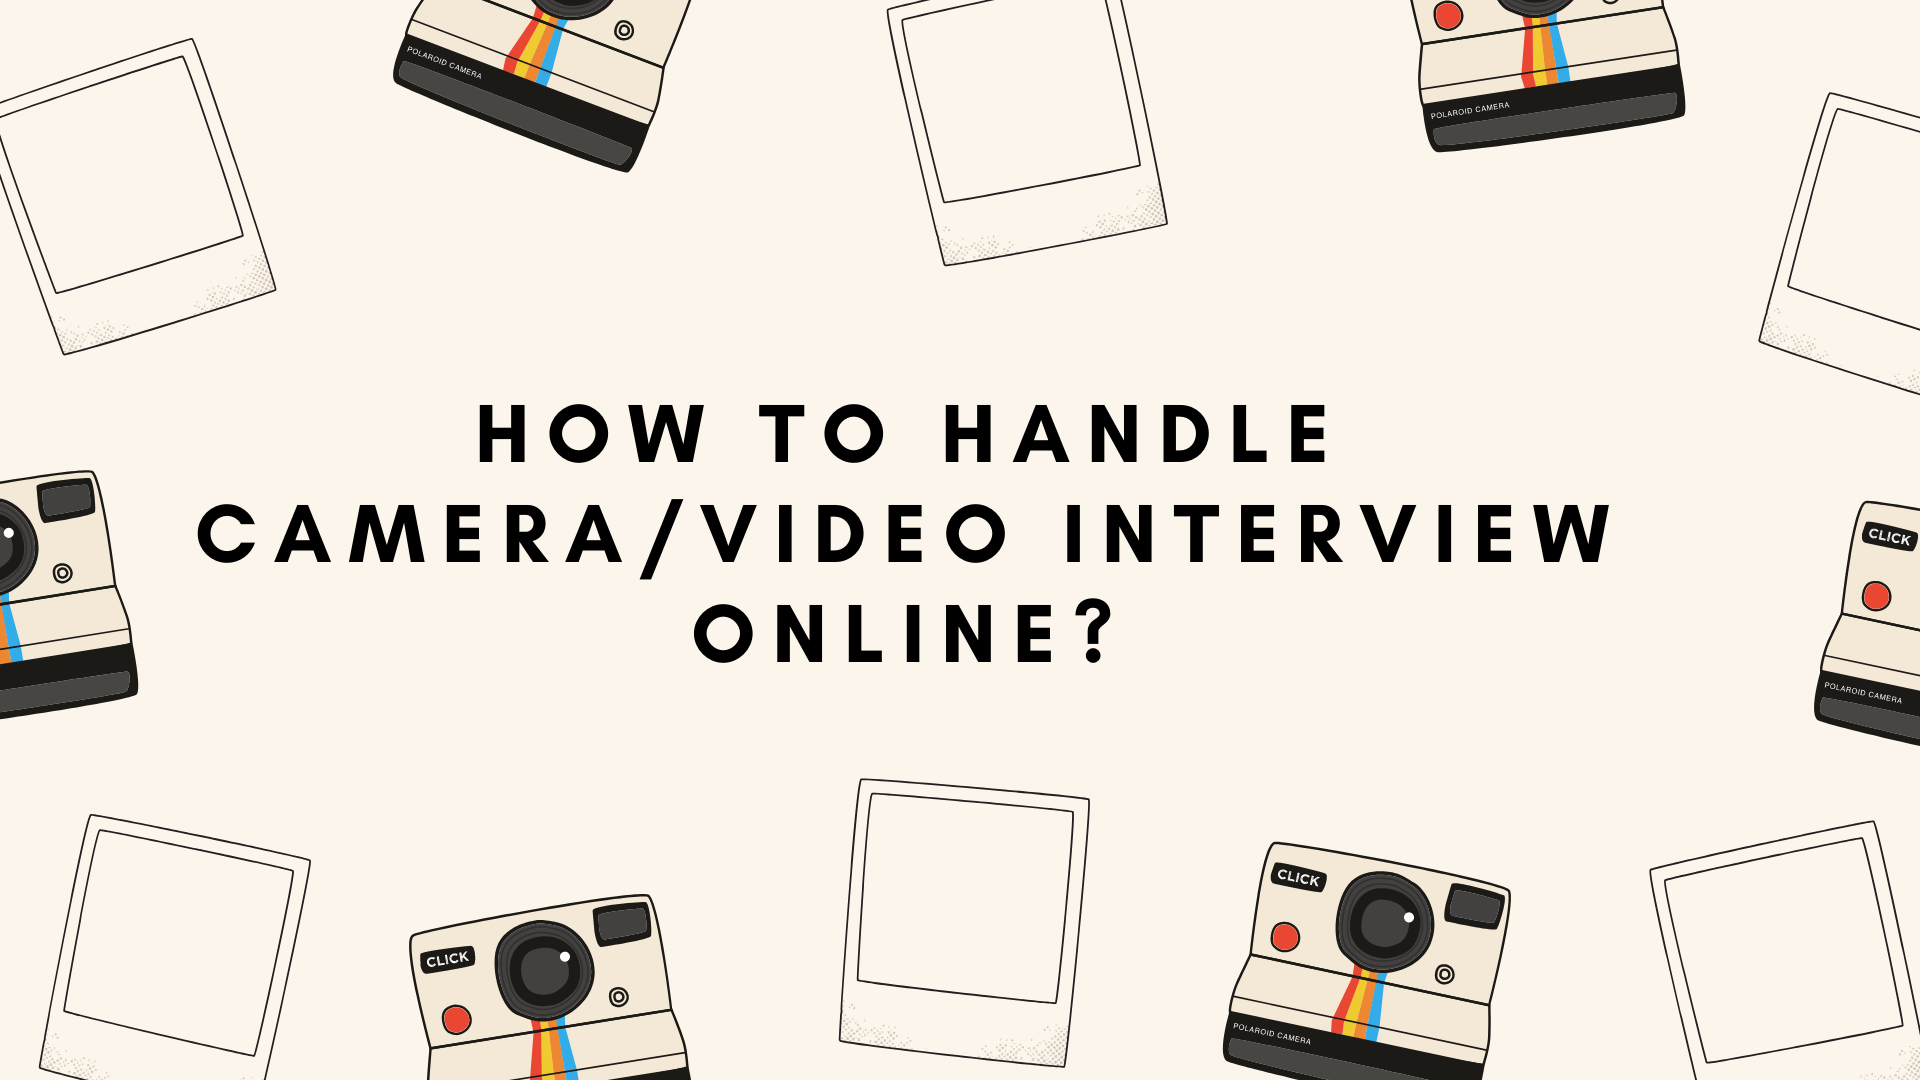 How to handle camera/video interview online?